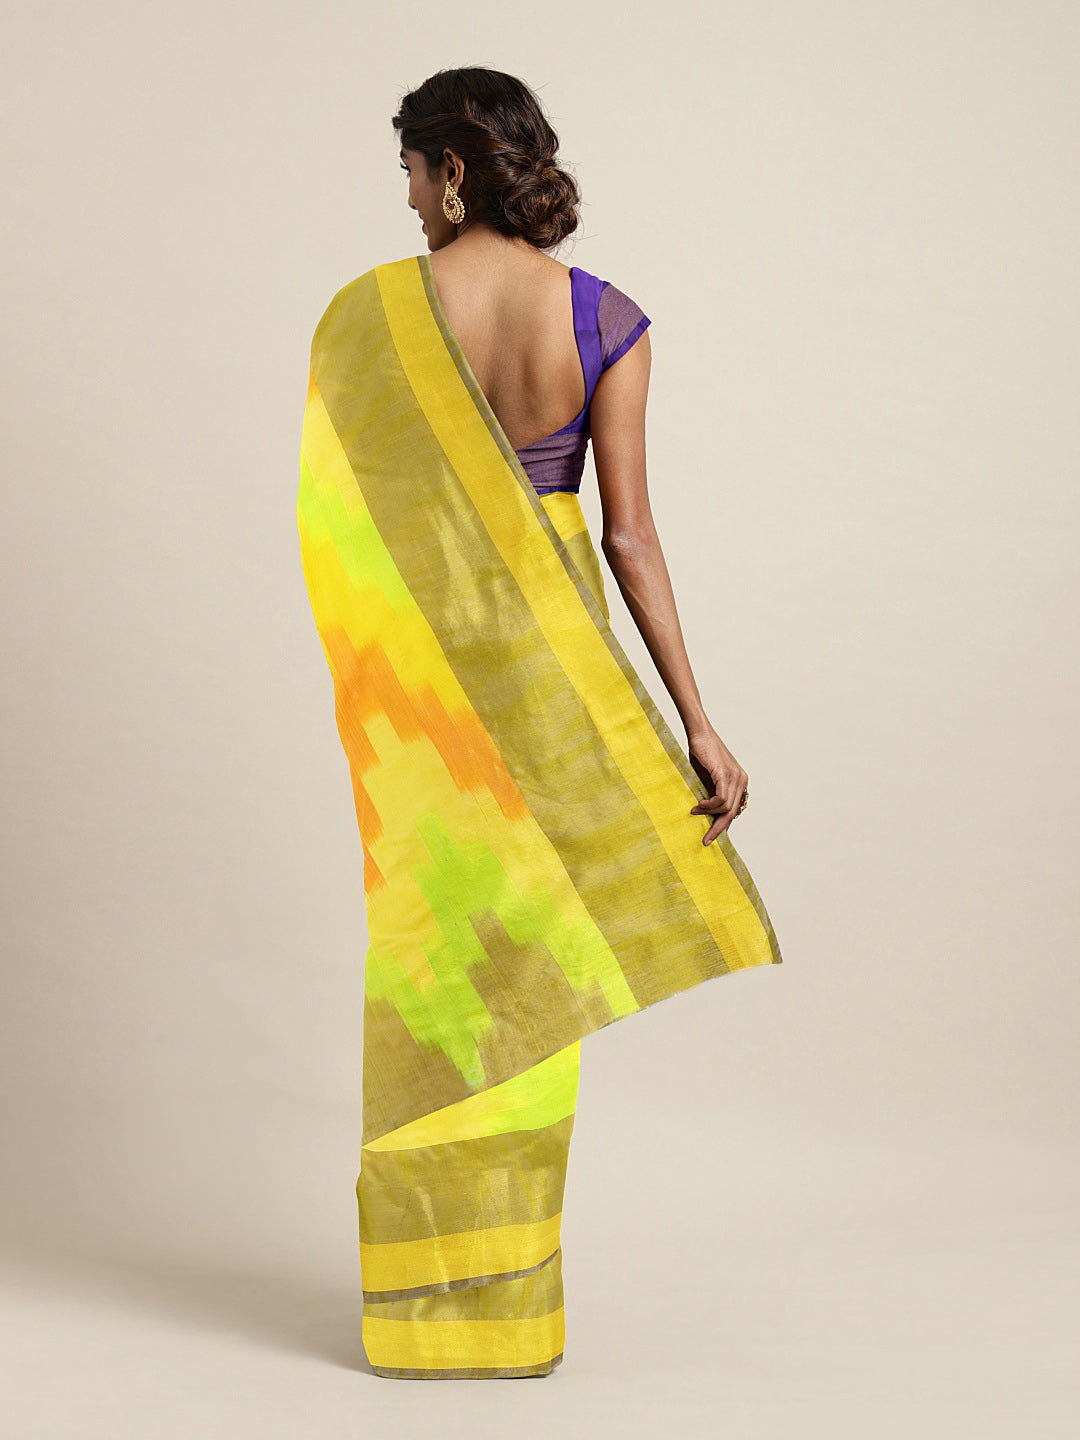 Kalakari India Upppada Silk Woven Saree With Blouse SKHSSA0016-Saree-Kalakari India-SKHSSA0016-Bollywood, Geographical Indication, Hand Crafted, Heritage Prints, Natural Dyes, Sarees, South Silk, Sustainable Fabrics, Uppada Silk, Woven-[Linen,Ethnic,wear,Fashionista,Handloom,Handicraft,Indigo,blockprint,block,print,Cotton,Chanderi,Blue, latest,classy,party,bollywood,trendy,summer,style,traditional,formal,elegant,unique,style,hand,block,print, dabu,booti,gift,present,glamorous,affordable,collecti